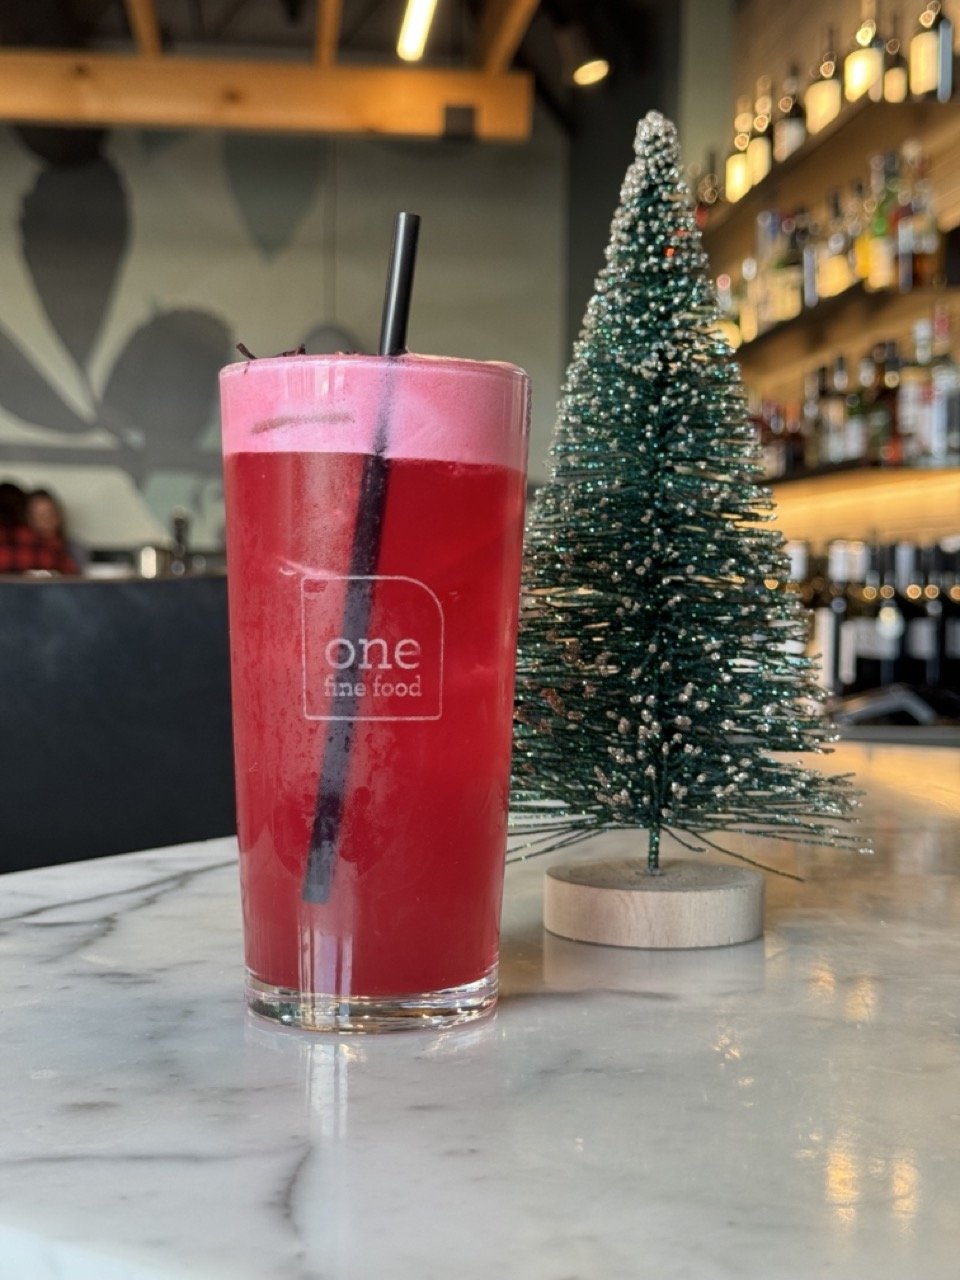 The "Pretty in Pink" mocktail at One Fine Food